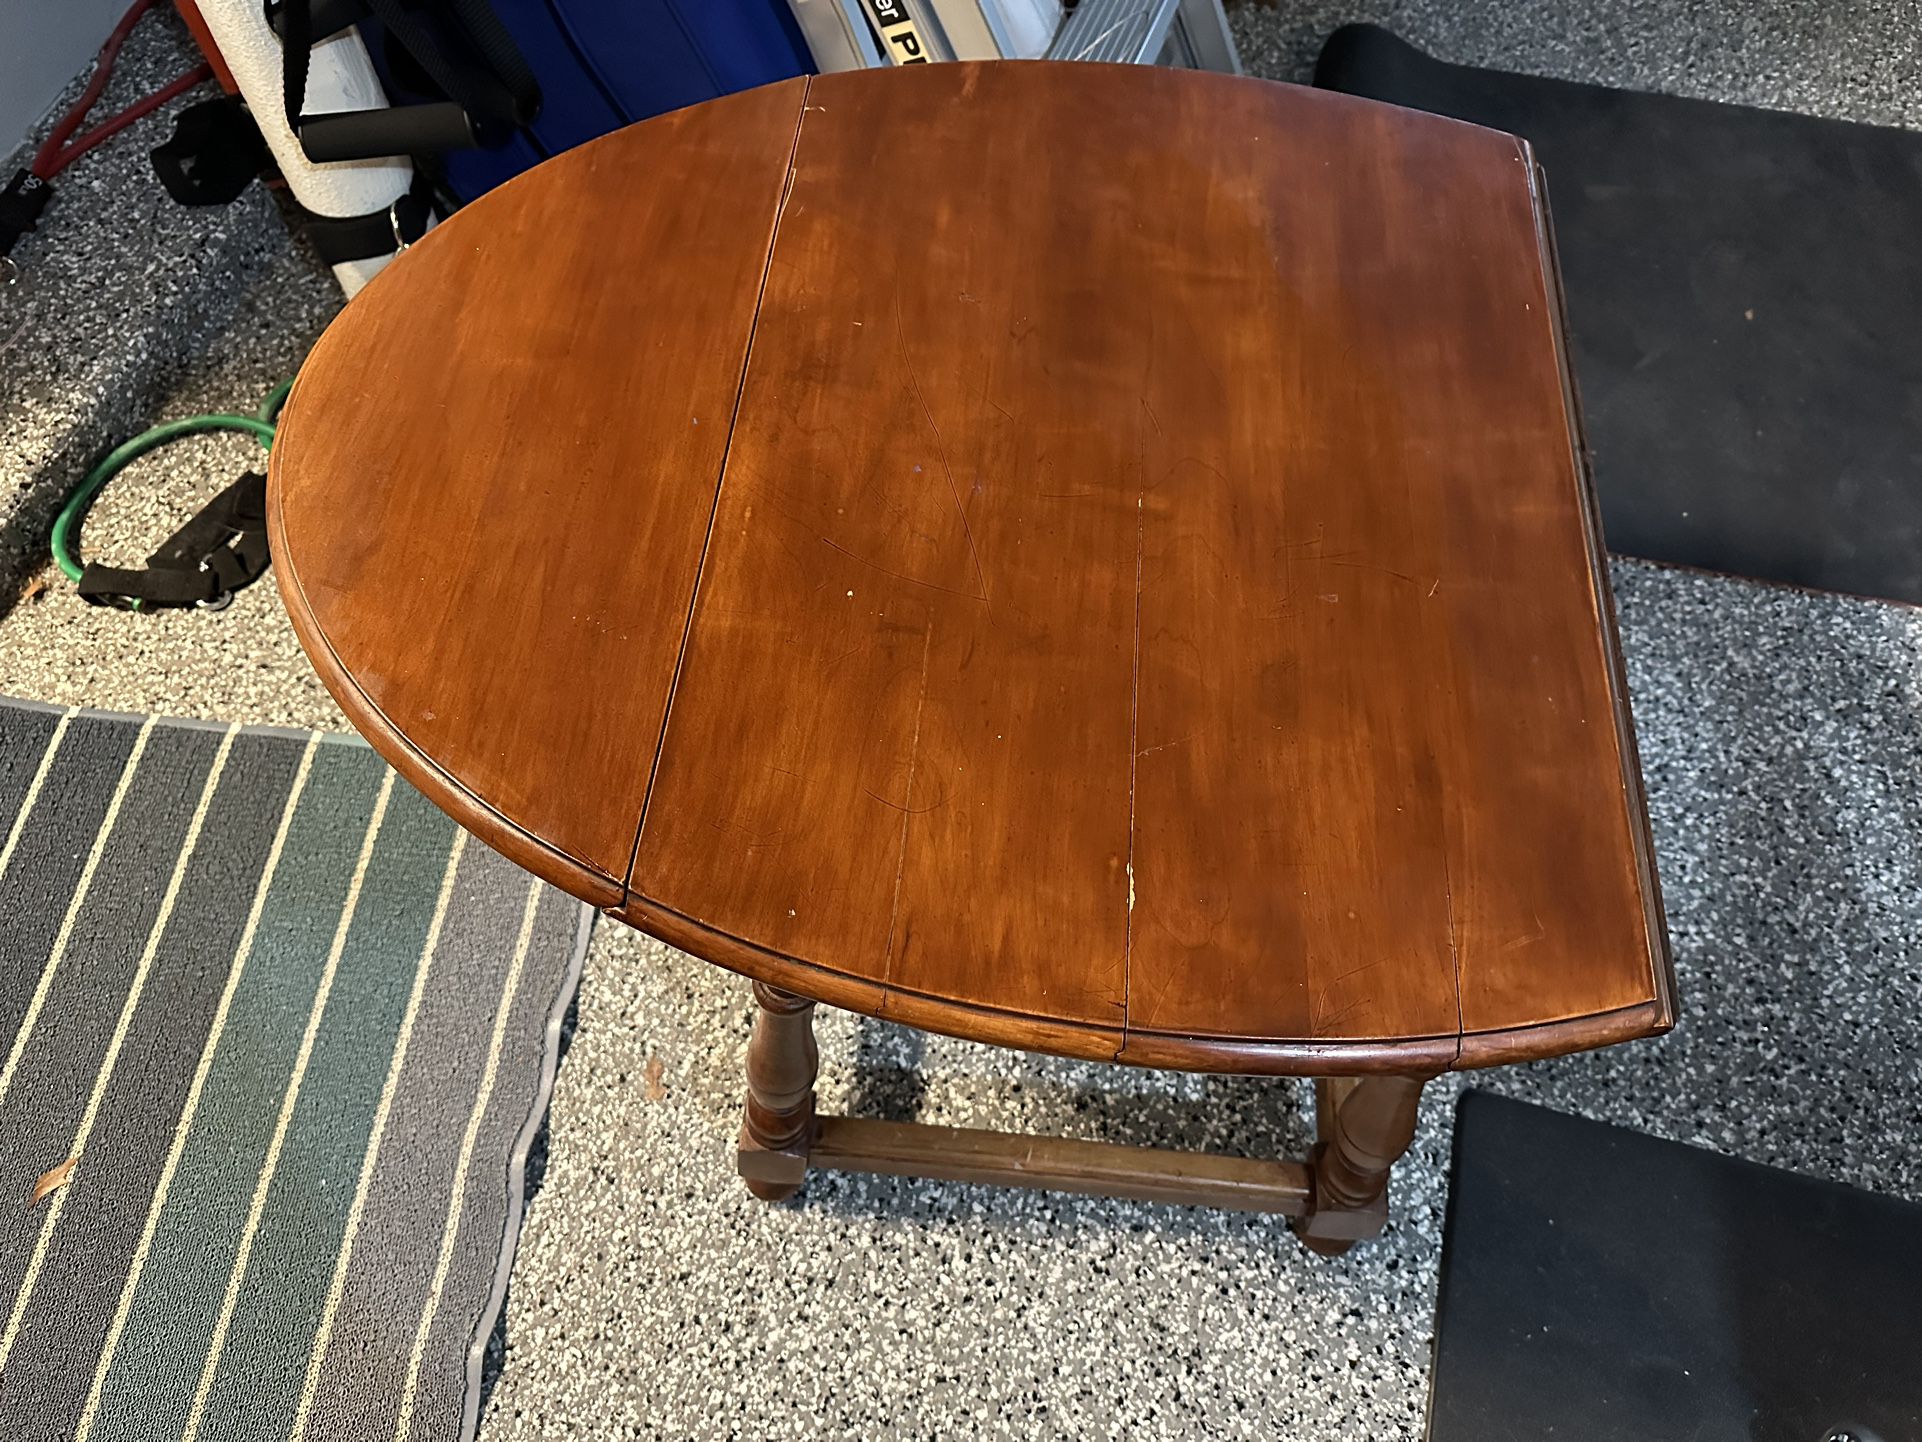 Small End Table